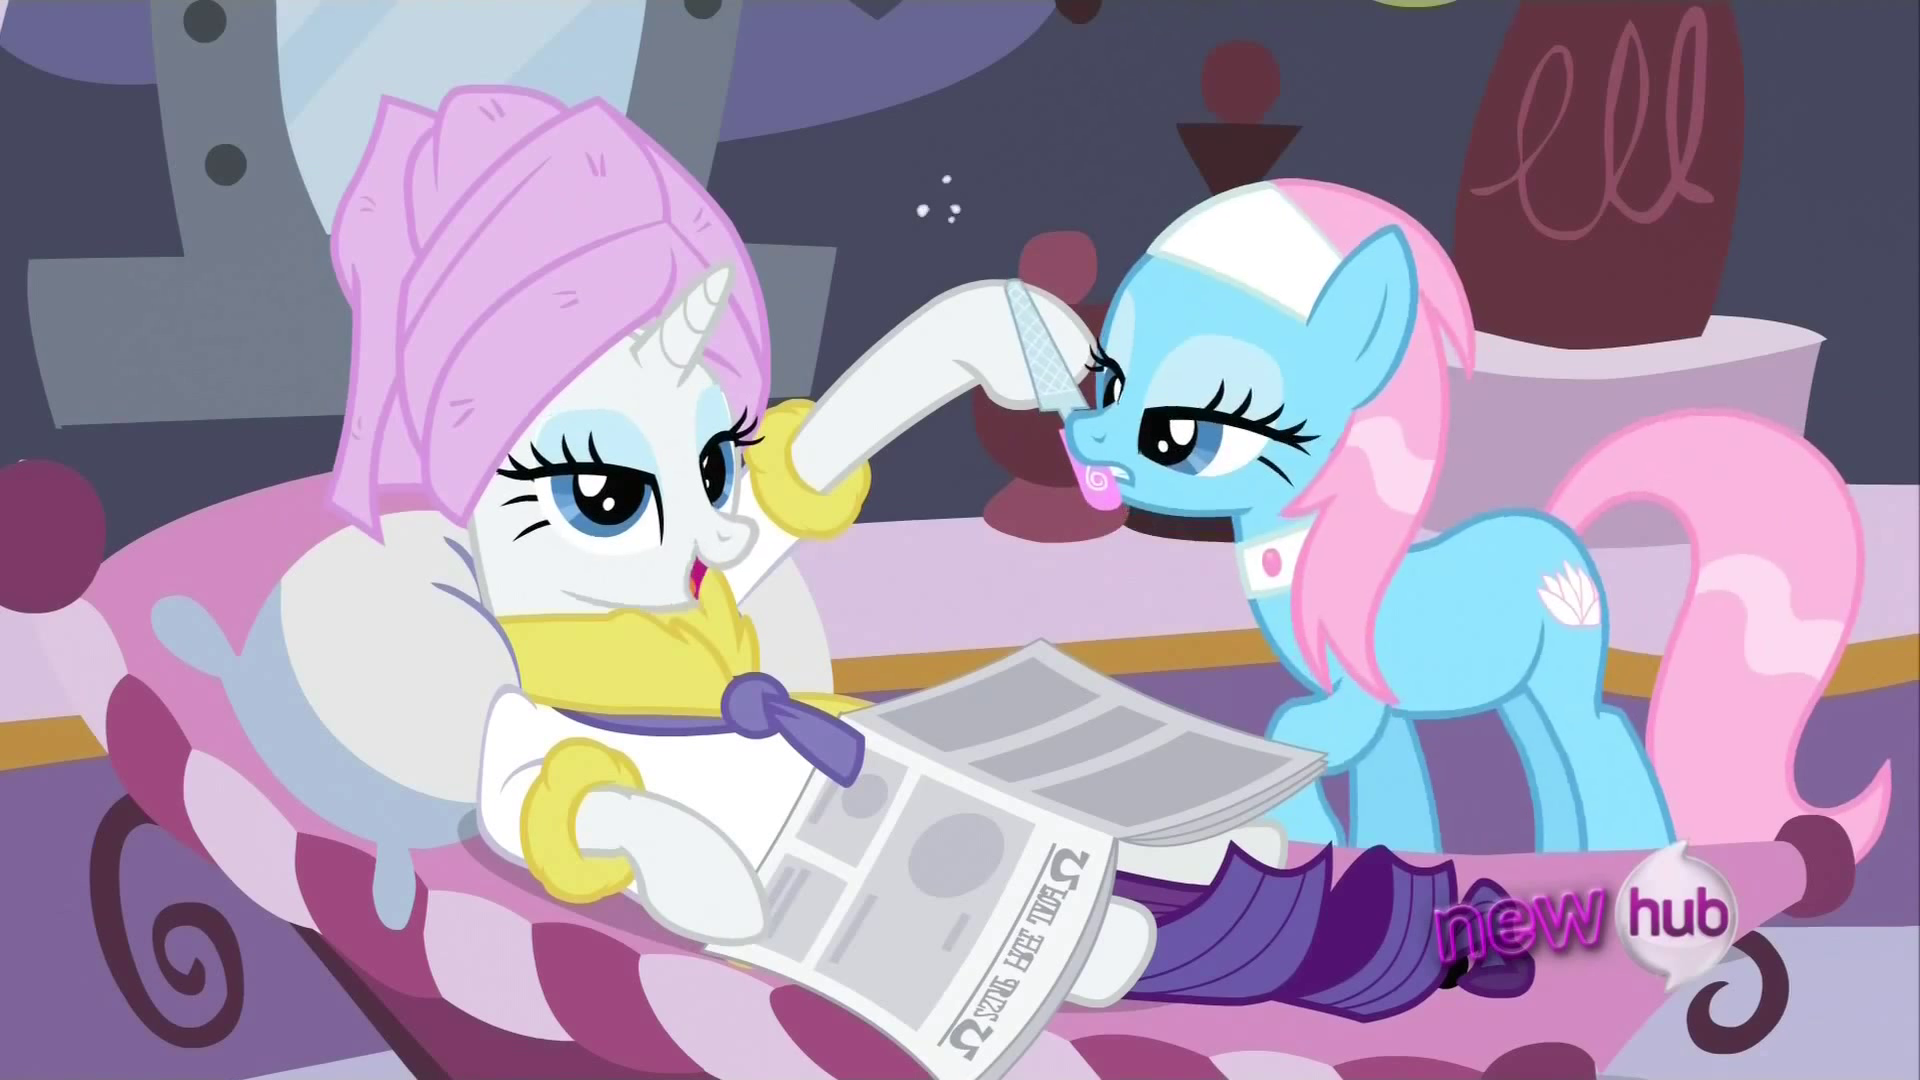 http://img2.wikia.nocookie.net/__cb20120331221344/mlp/images/f/f5/Rarity_%26_Lotus_S2E23.png